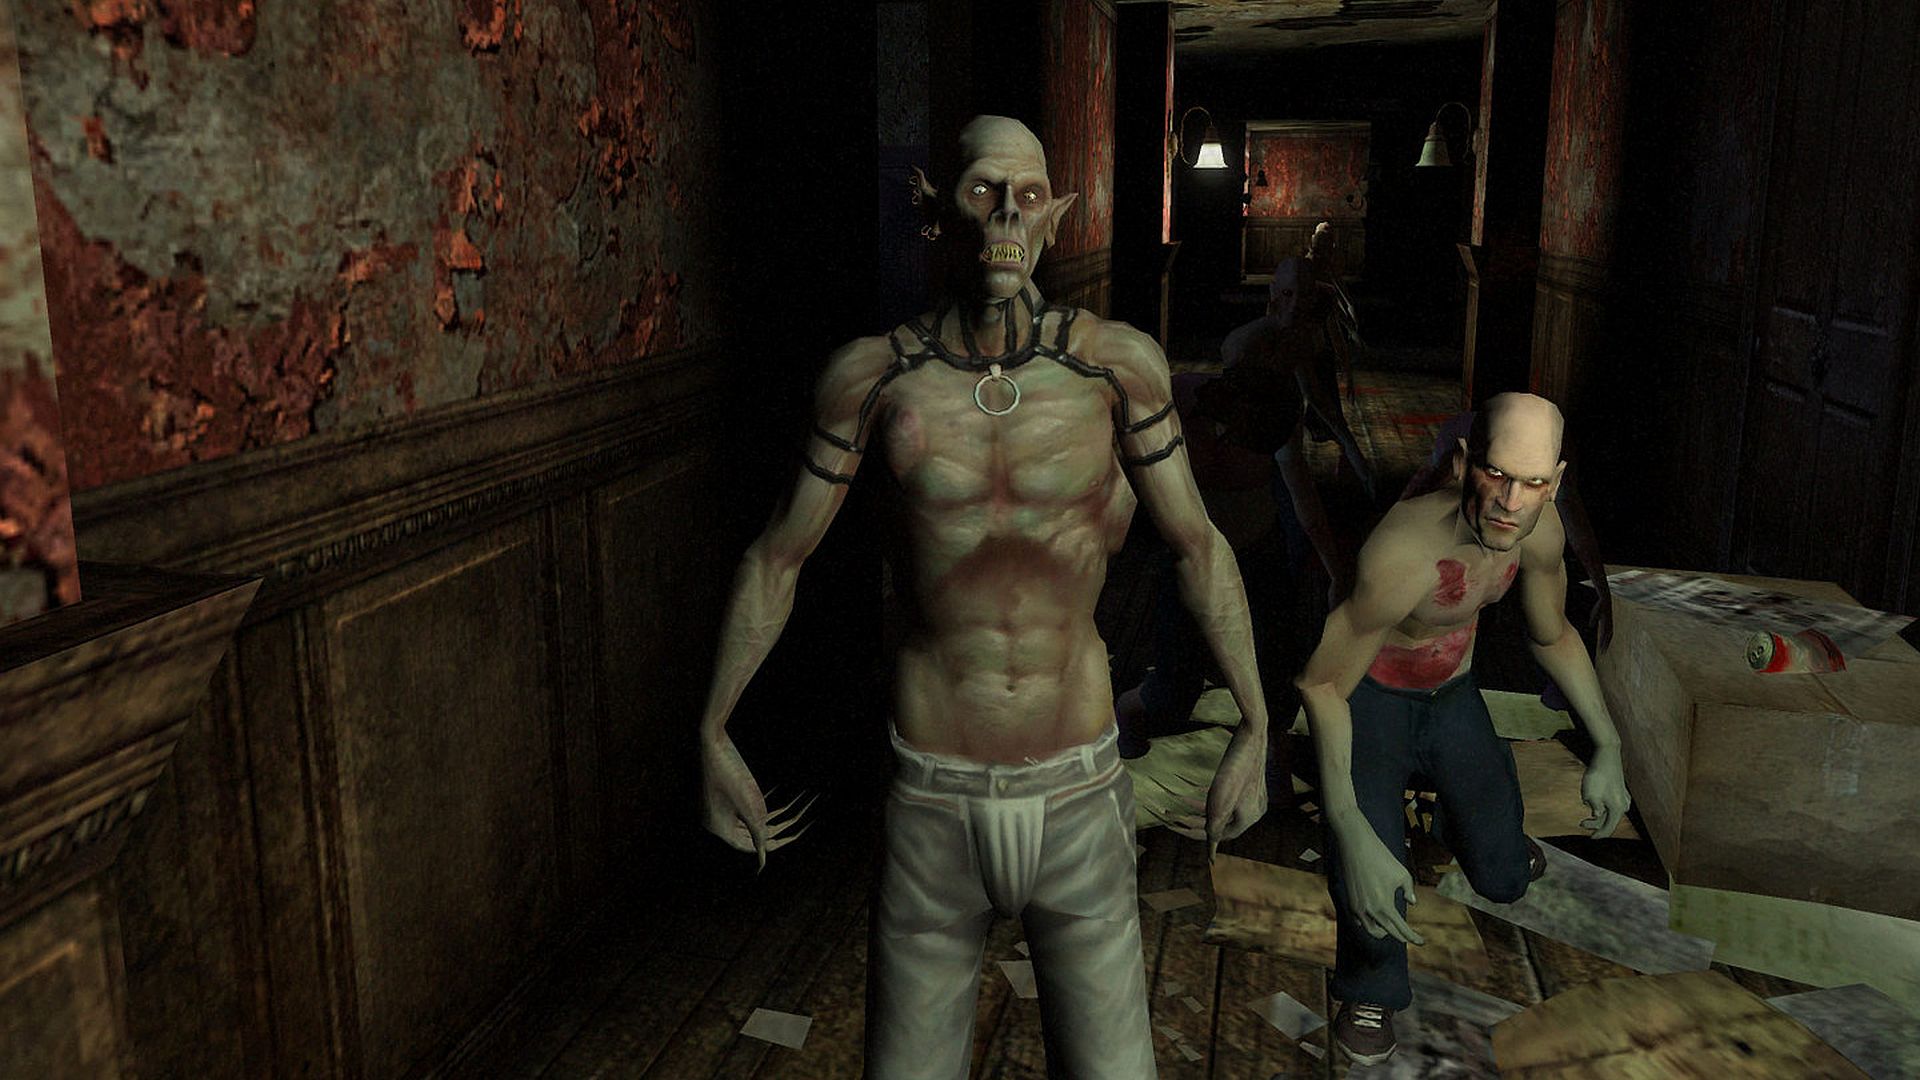 Vampire: The Masquerade Bloodlines 2 – Everything you should know!